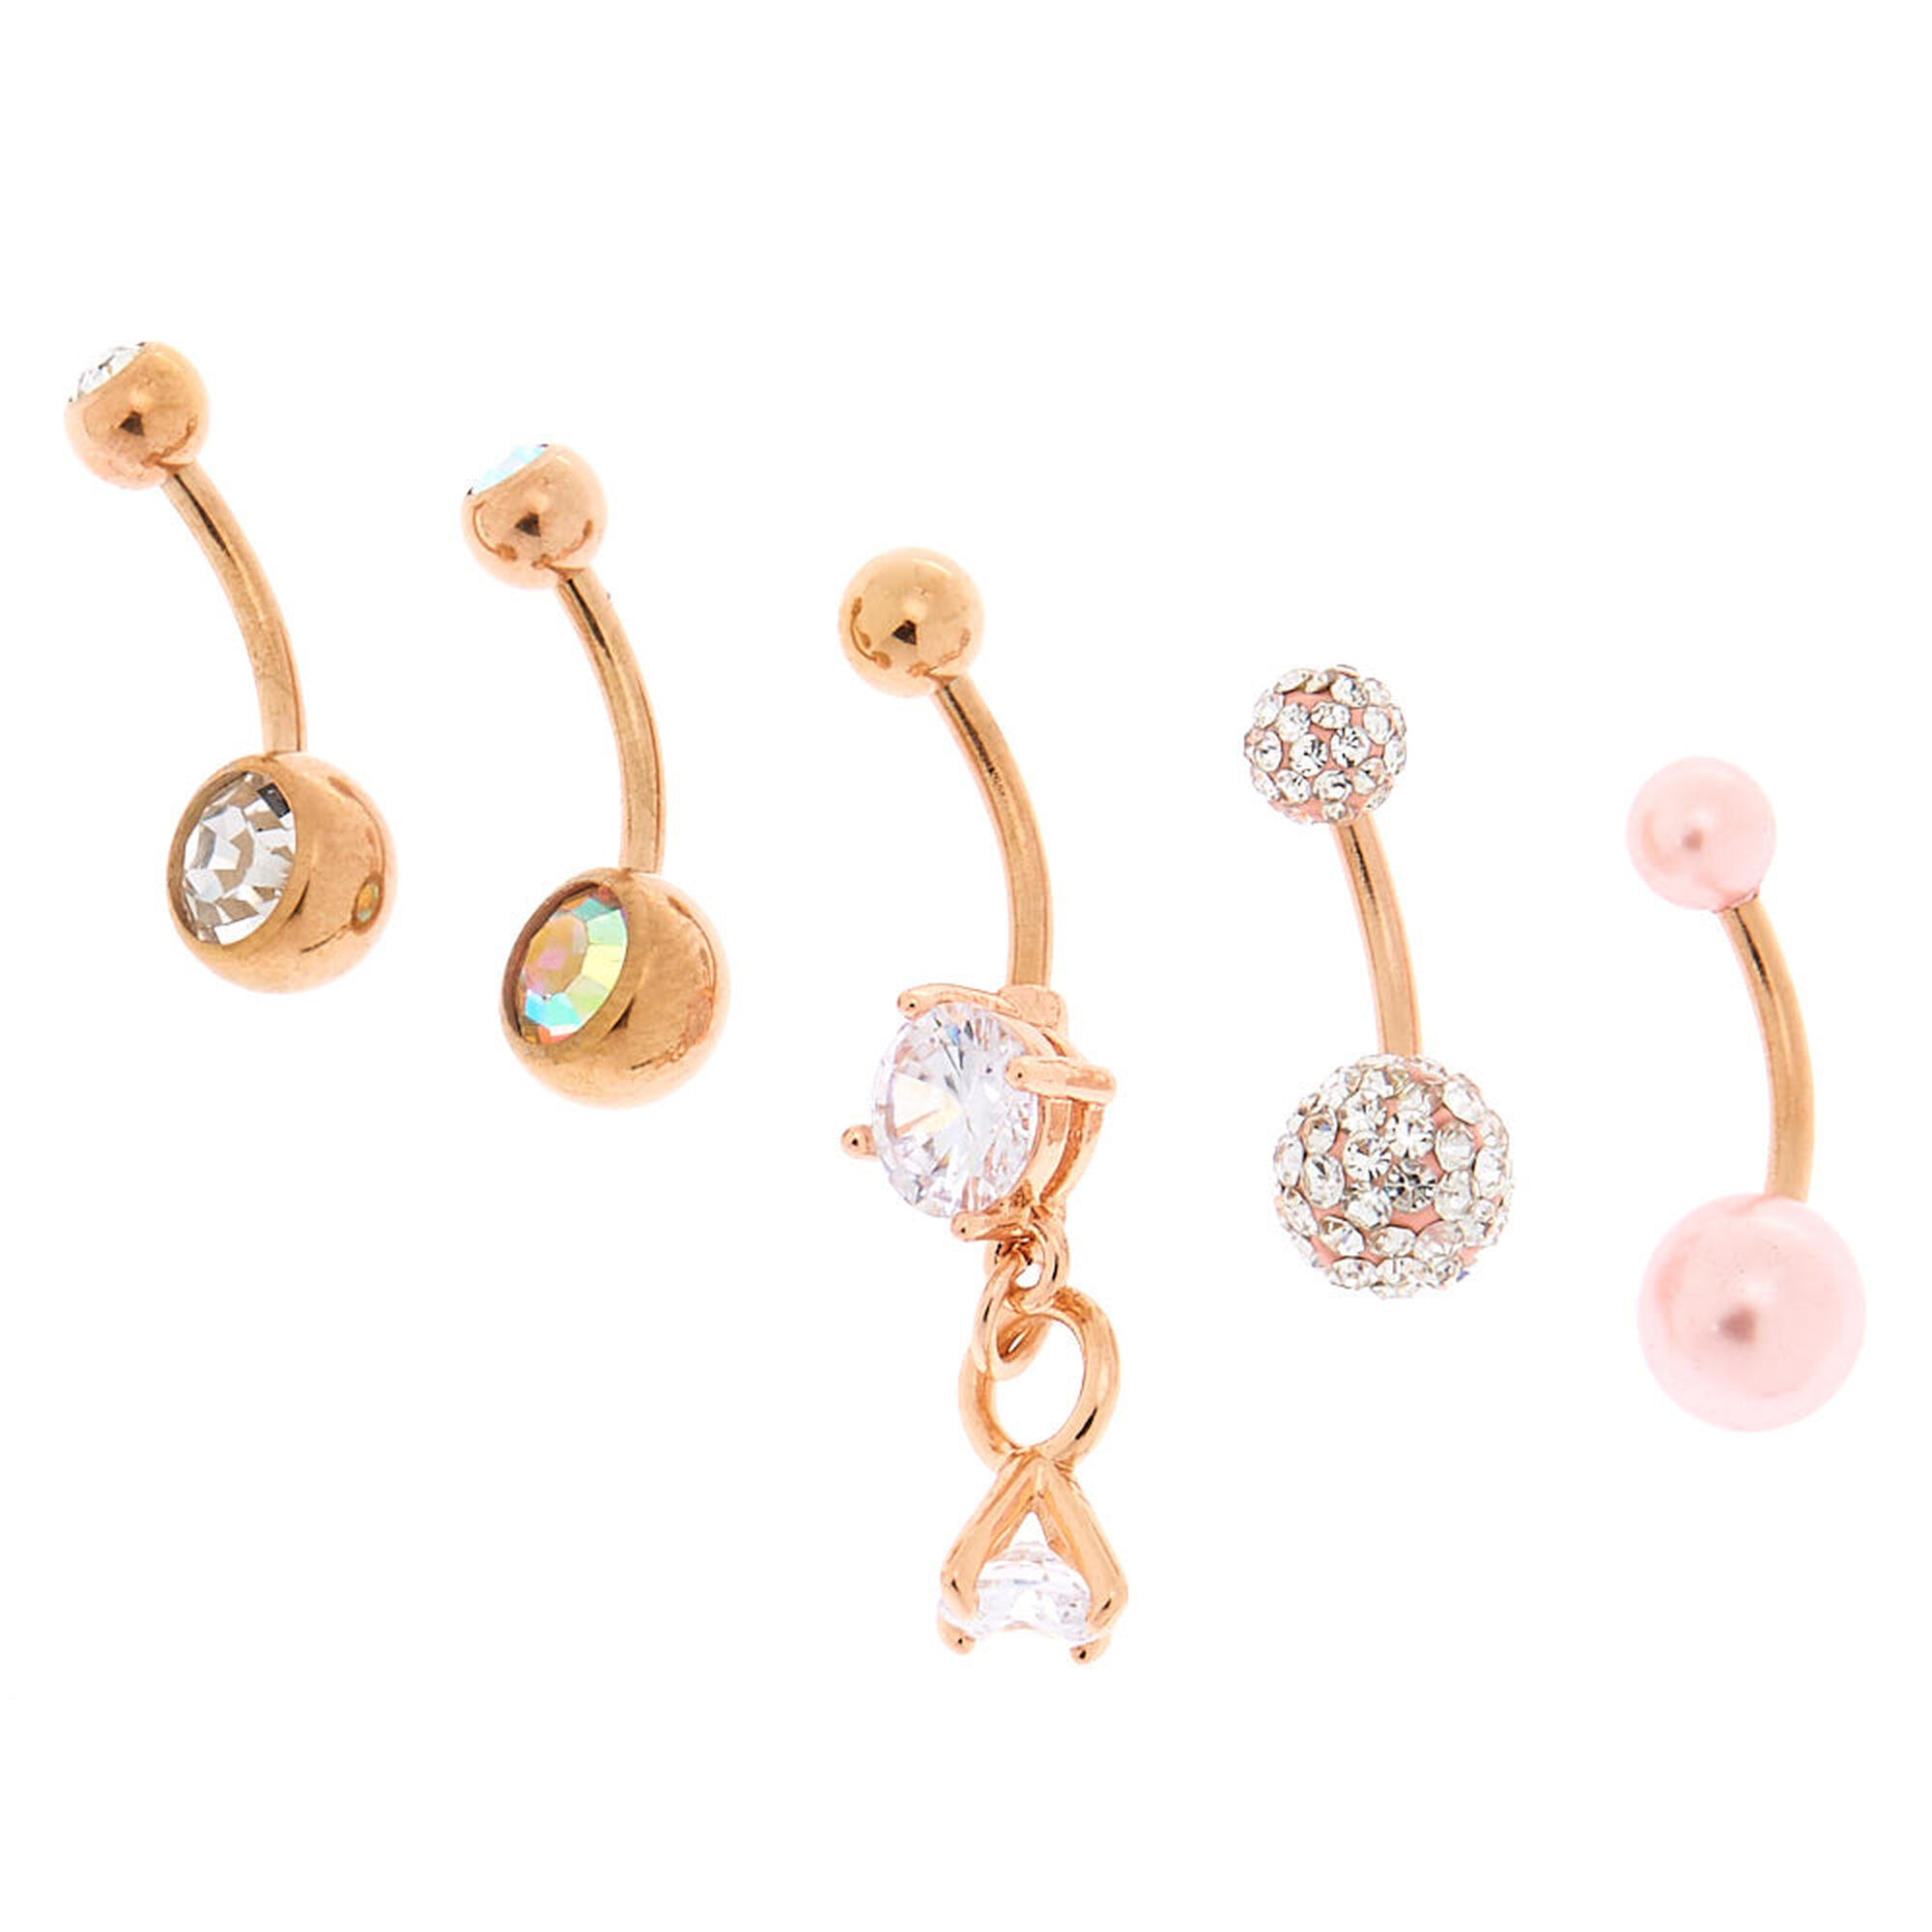 View Claires Rose 14G Blushing Belly Rings Pink 5 Pack Gold information